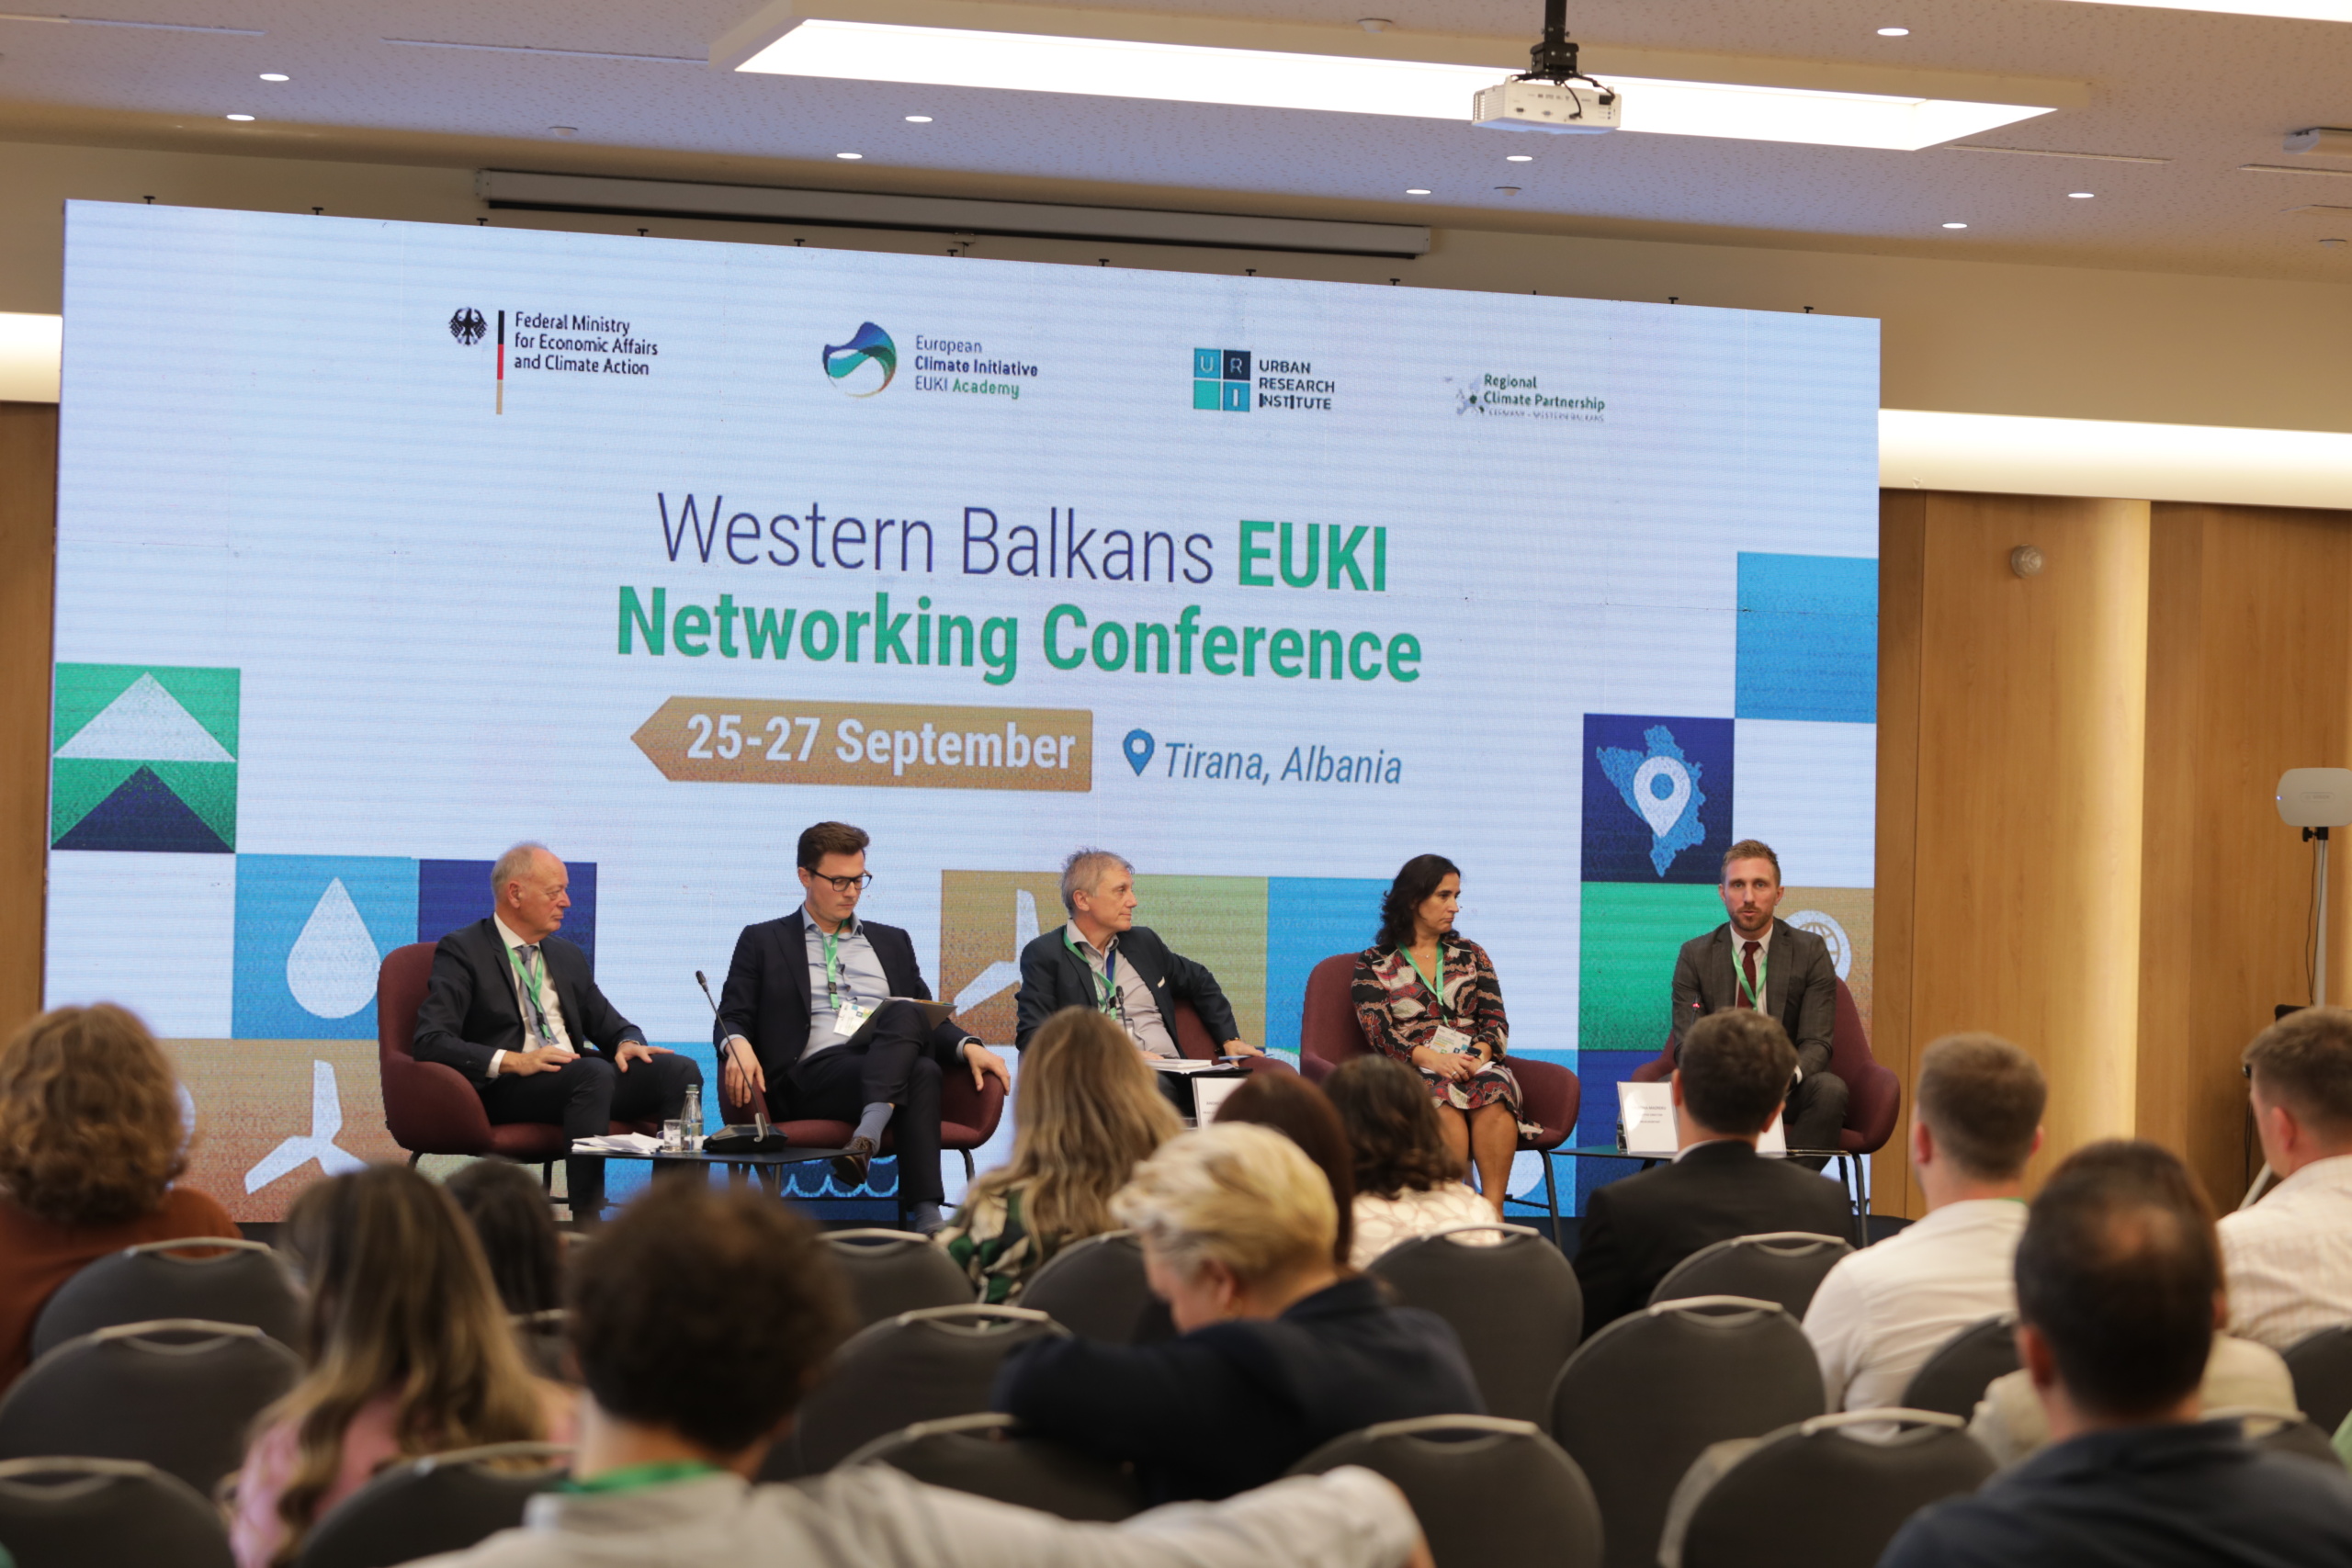 Panel discussion at the main conference day of the Western Balkans EUKI Networking Conference in Tirana, Albania. Photo: ©Elvis Dako / EUKI